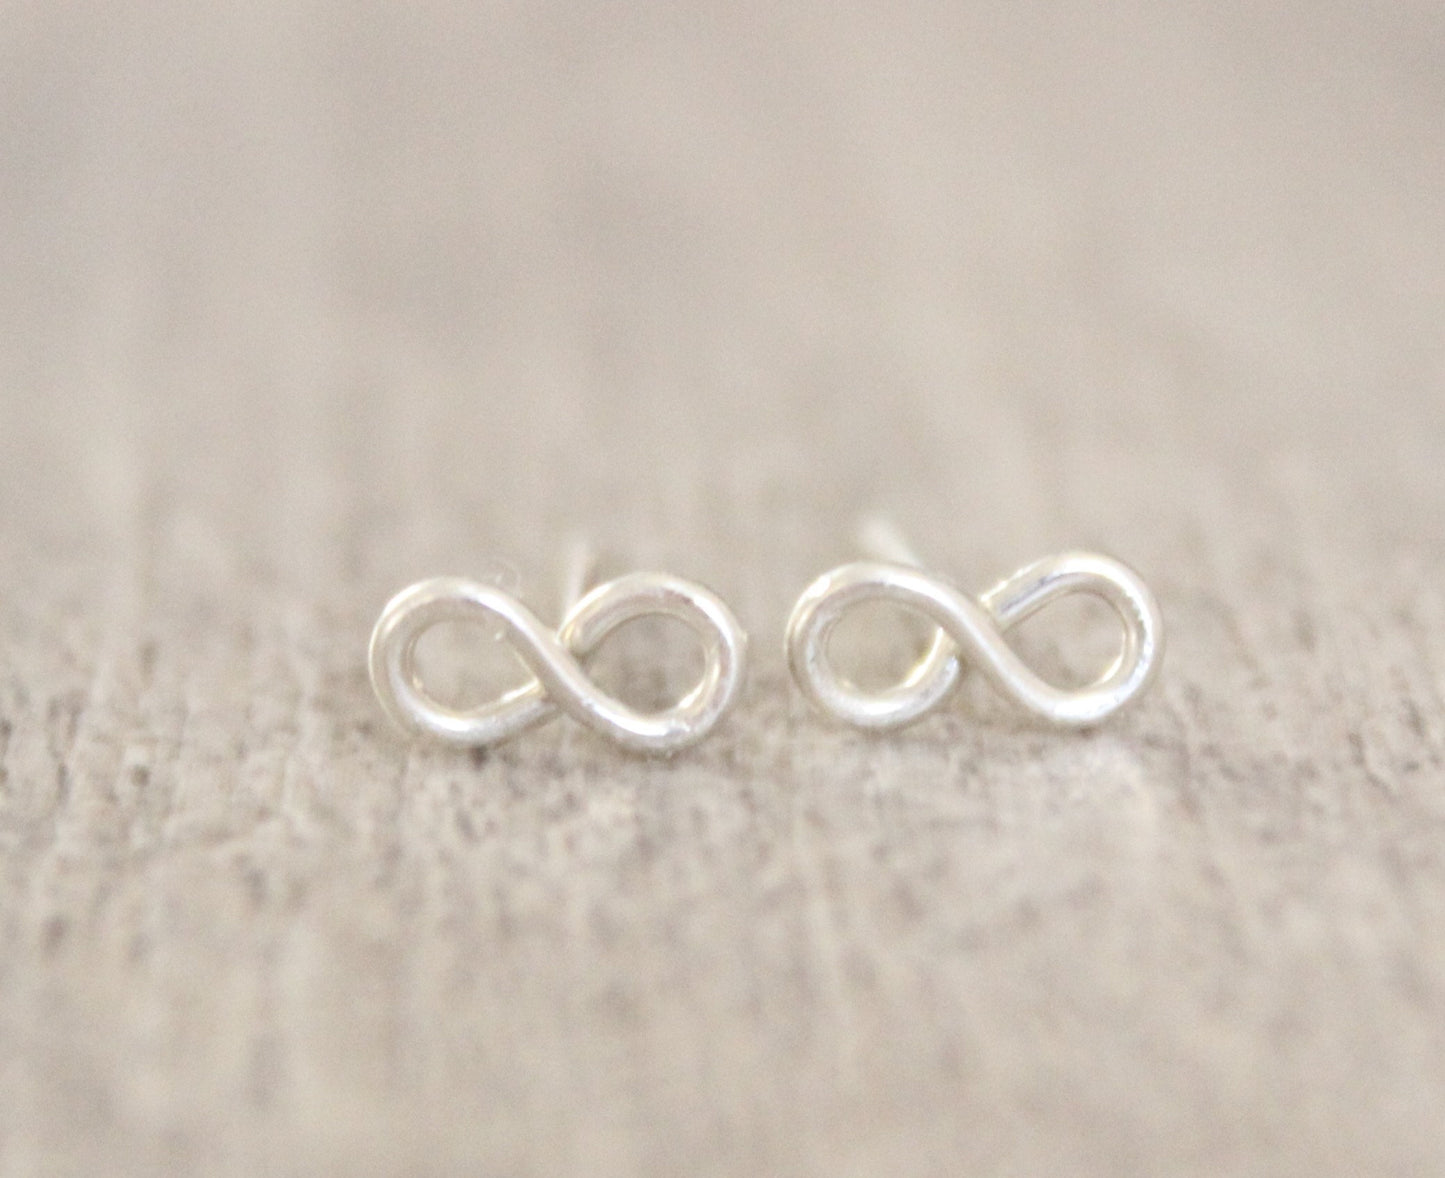 Tiny Gold Infinity Earrings // Gold, Rose Gold or Sterling Silver Infinity Studs // 14K Gold Filled Infinity Stud Earrings // Gift Idea